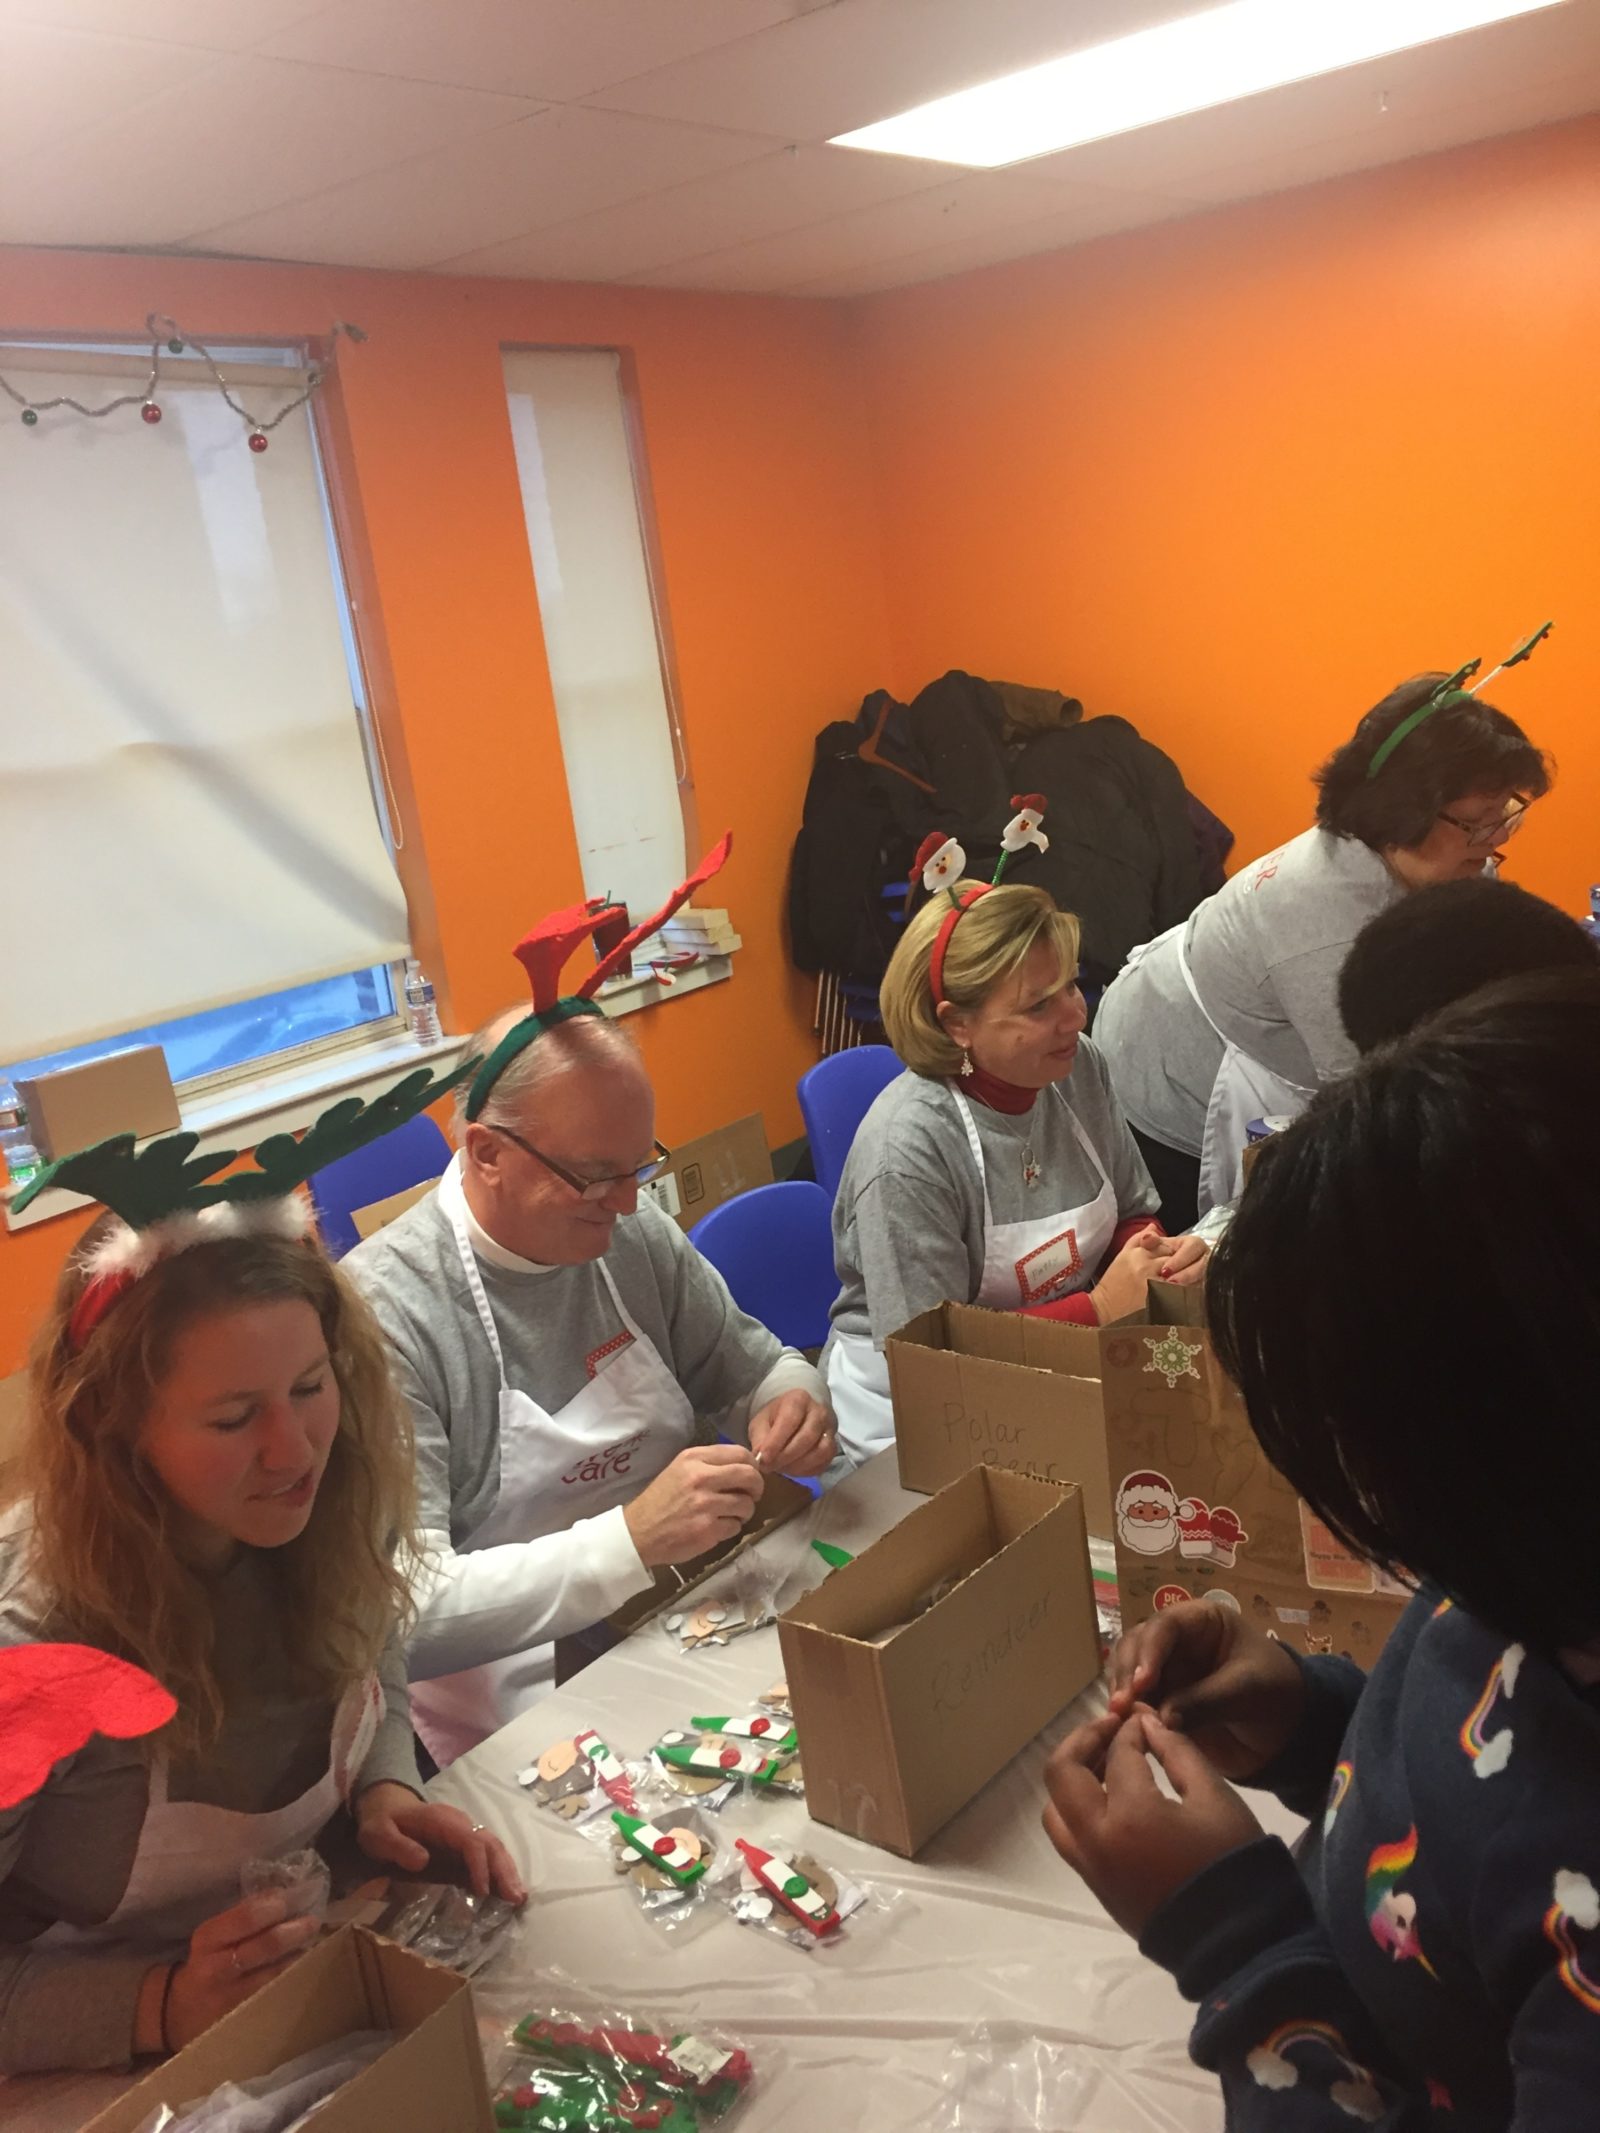 Premier employees assisting children in creating holiday crafts for their family. Premier employees are wearing holiday reindeer headbands.